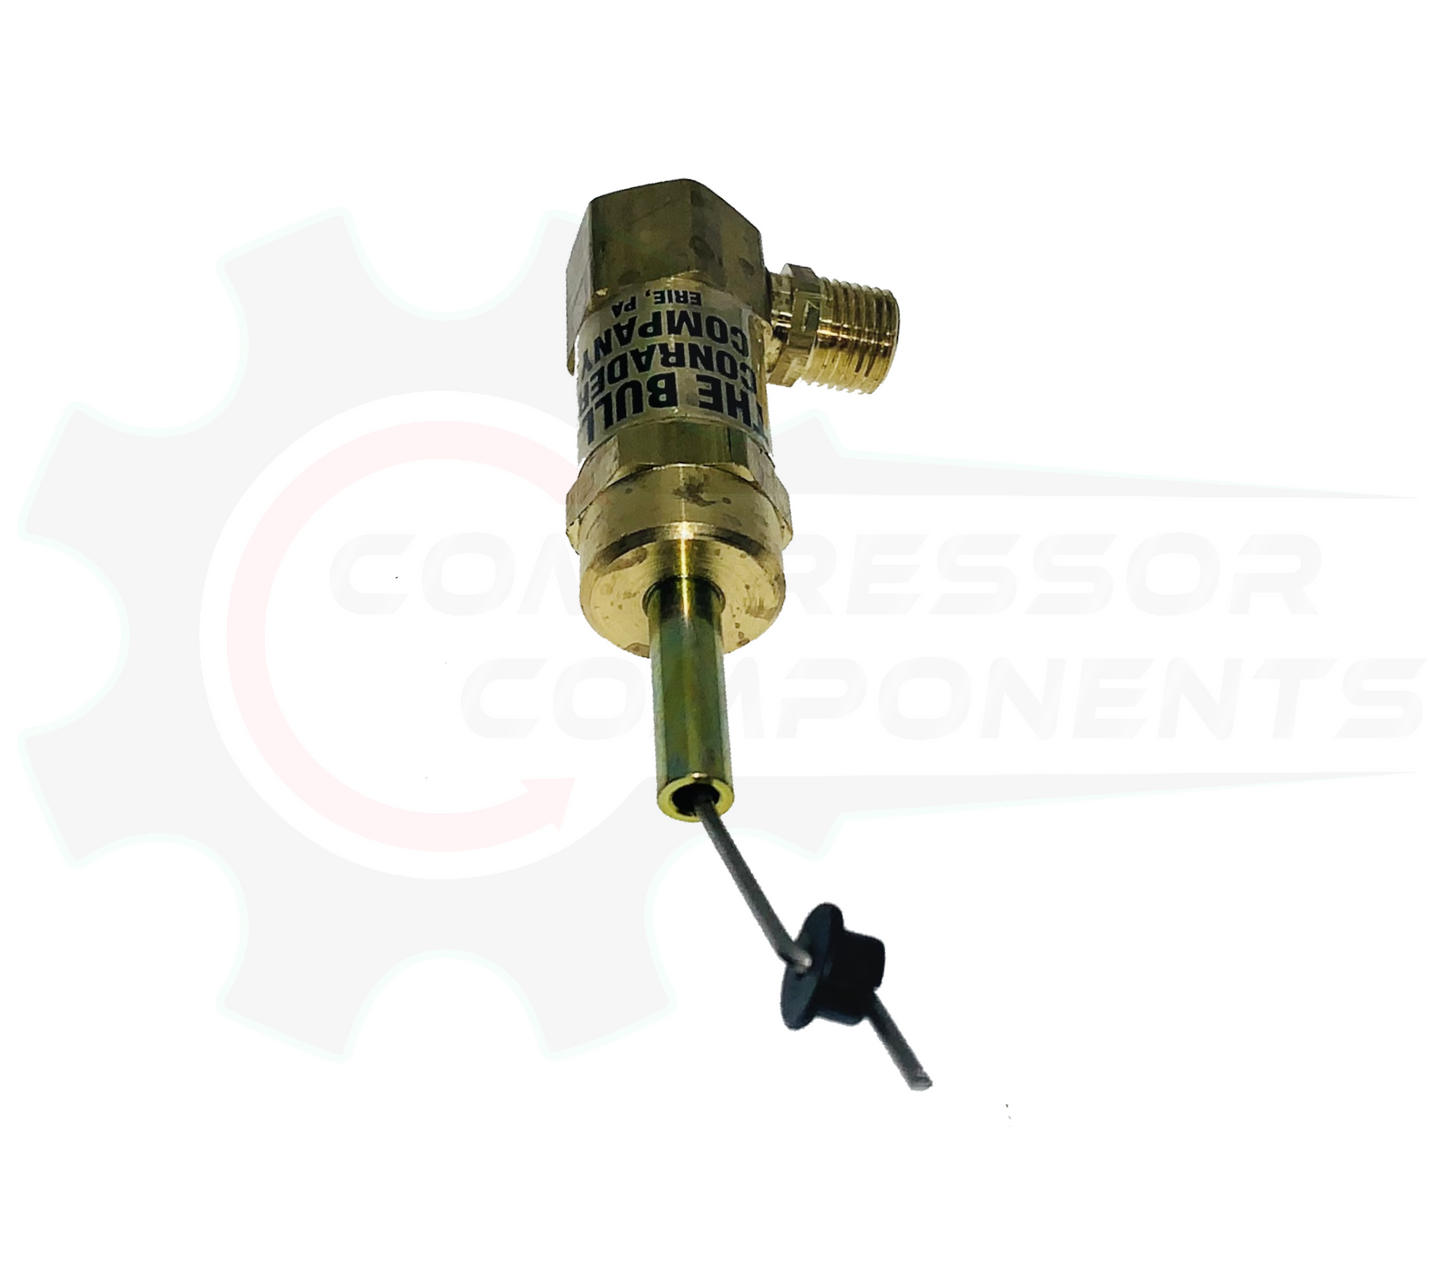 Honda GX 160 and GX 200 Throttle Control Actuator For 5.5-6.5 HP Gas Engine / TCSA-H-5565S-SC